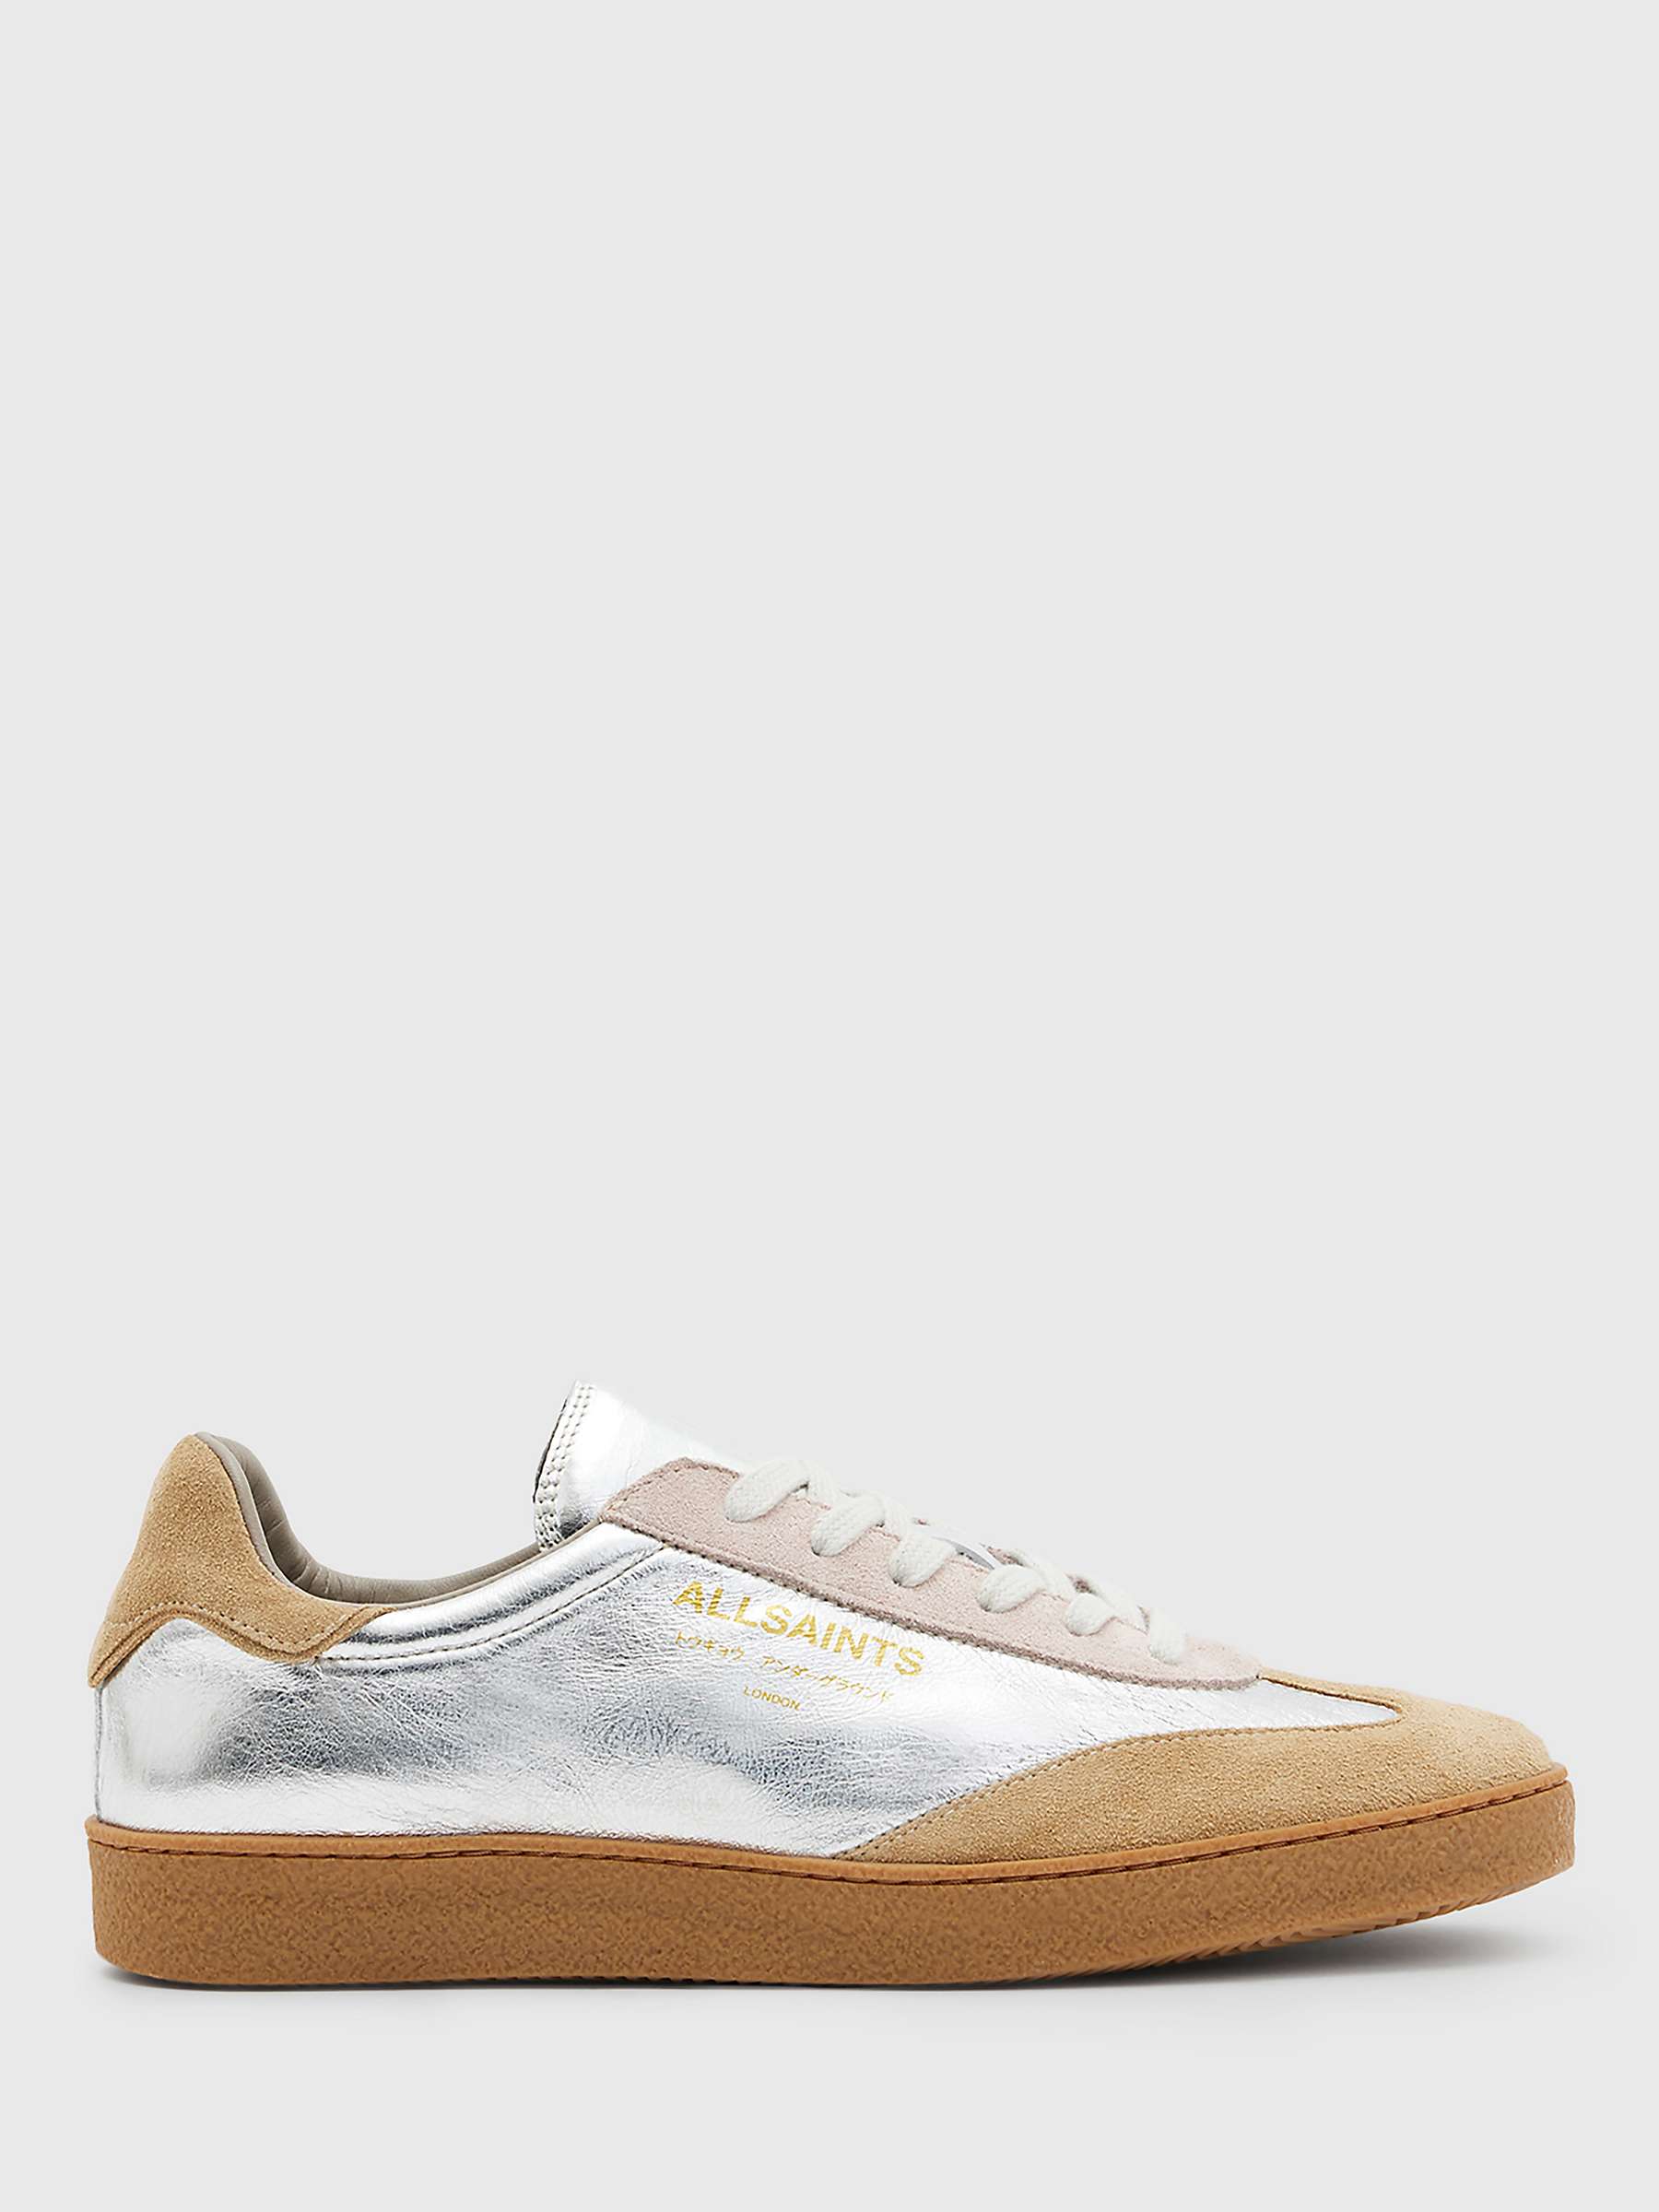 Buy AllSaints Thelma Metallic Leather Trainers, Silver/Rose Pink/Tan Online at johnlewis.com